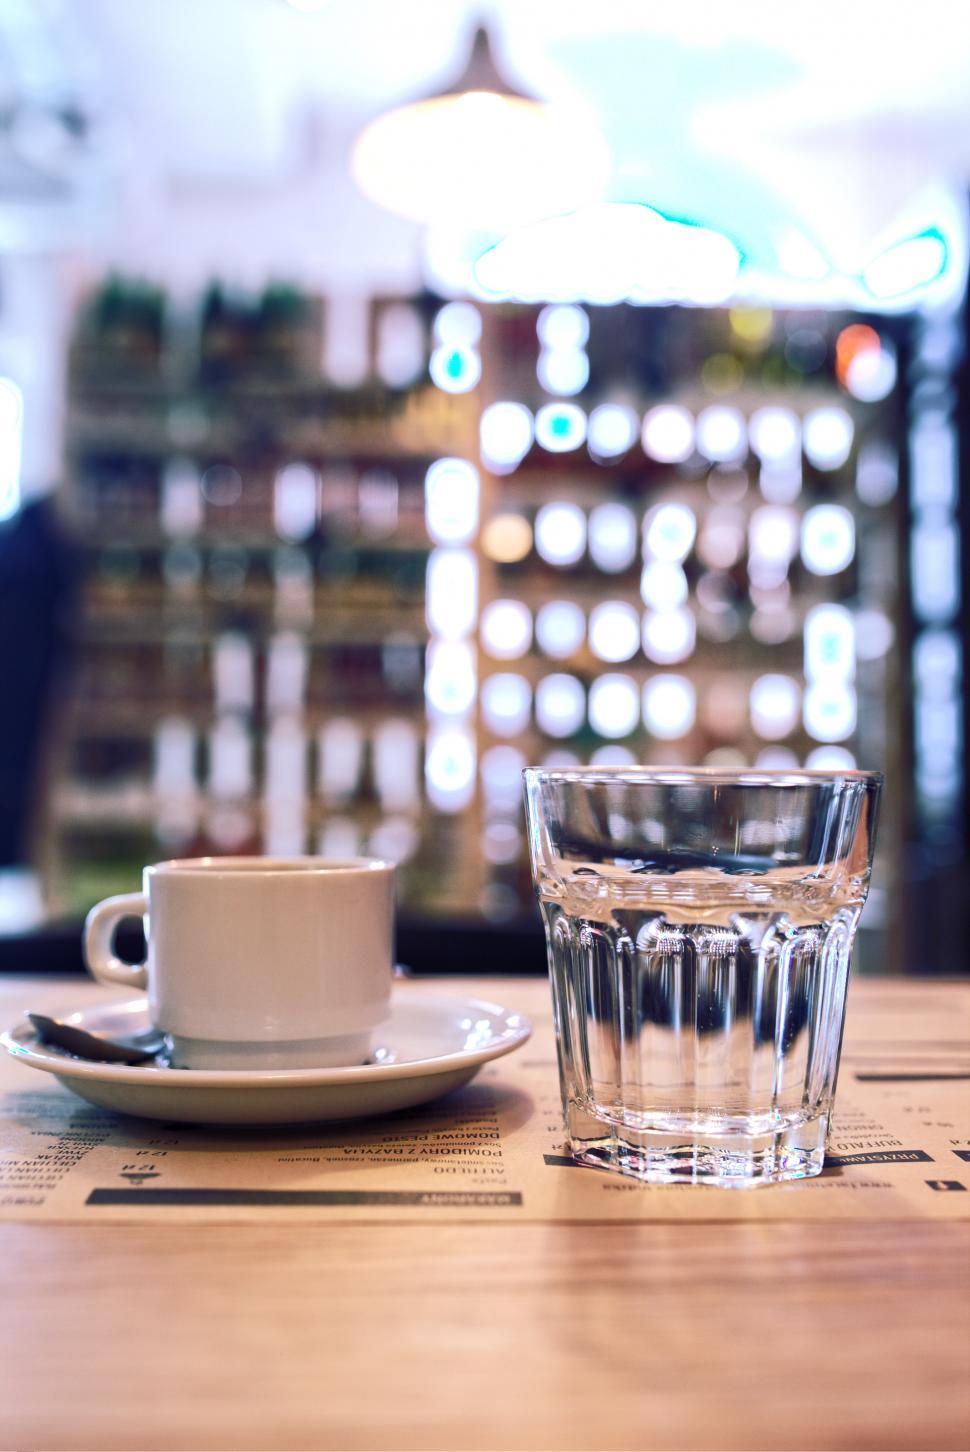 Free Image of A Glass of Water and a Plate on a Table 